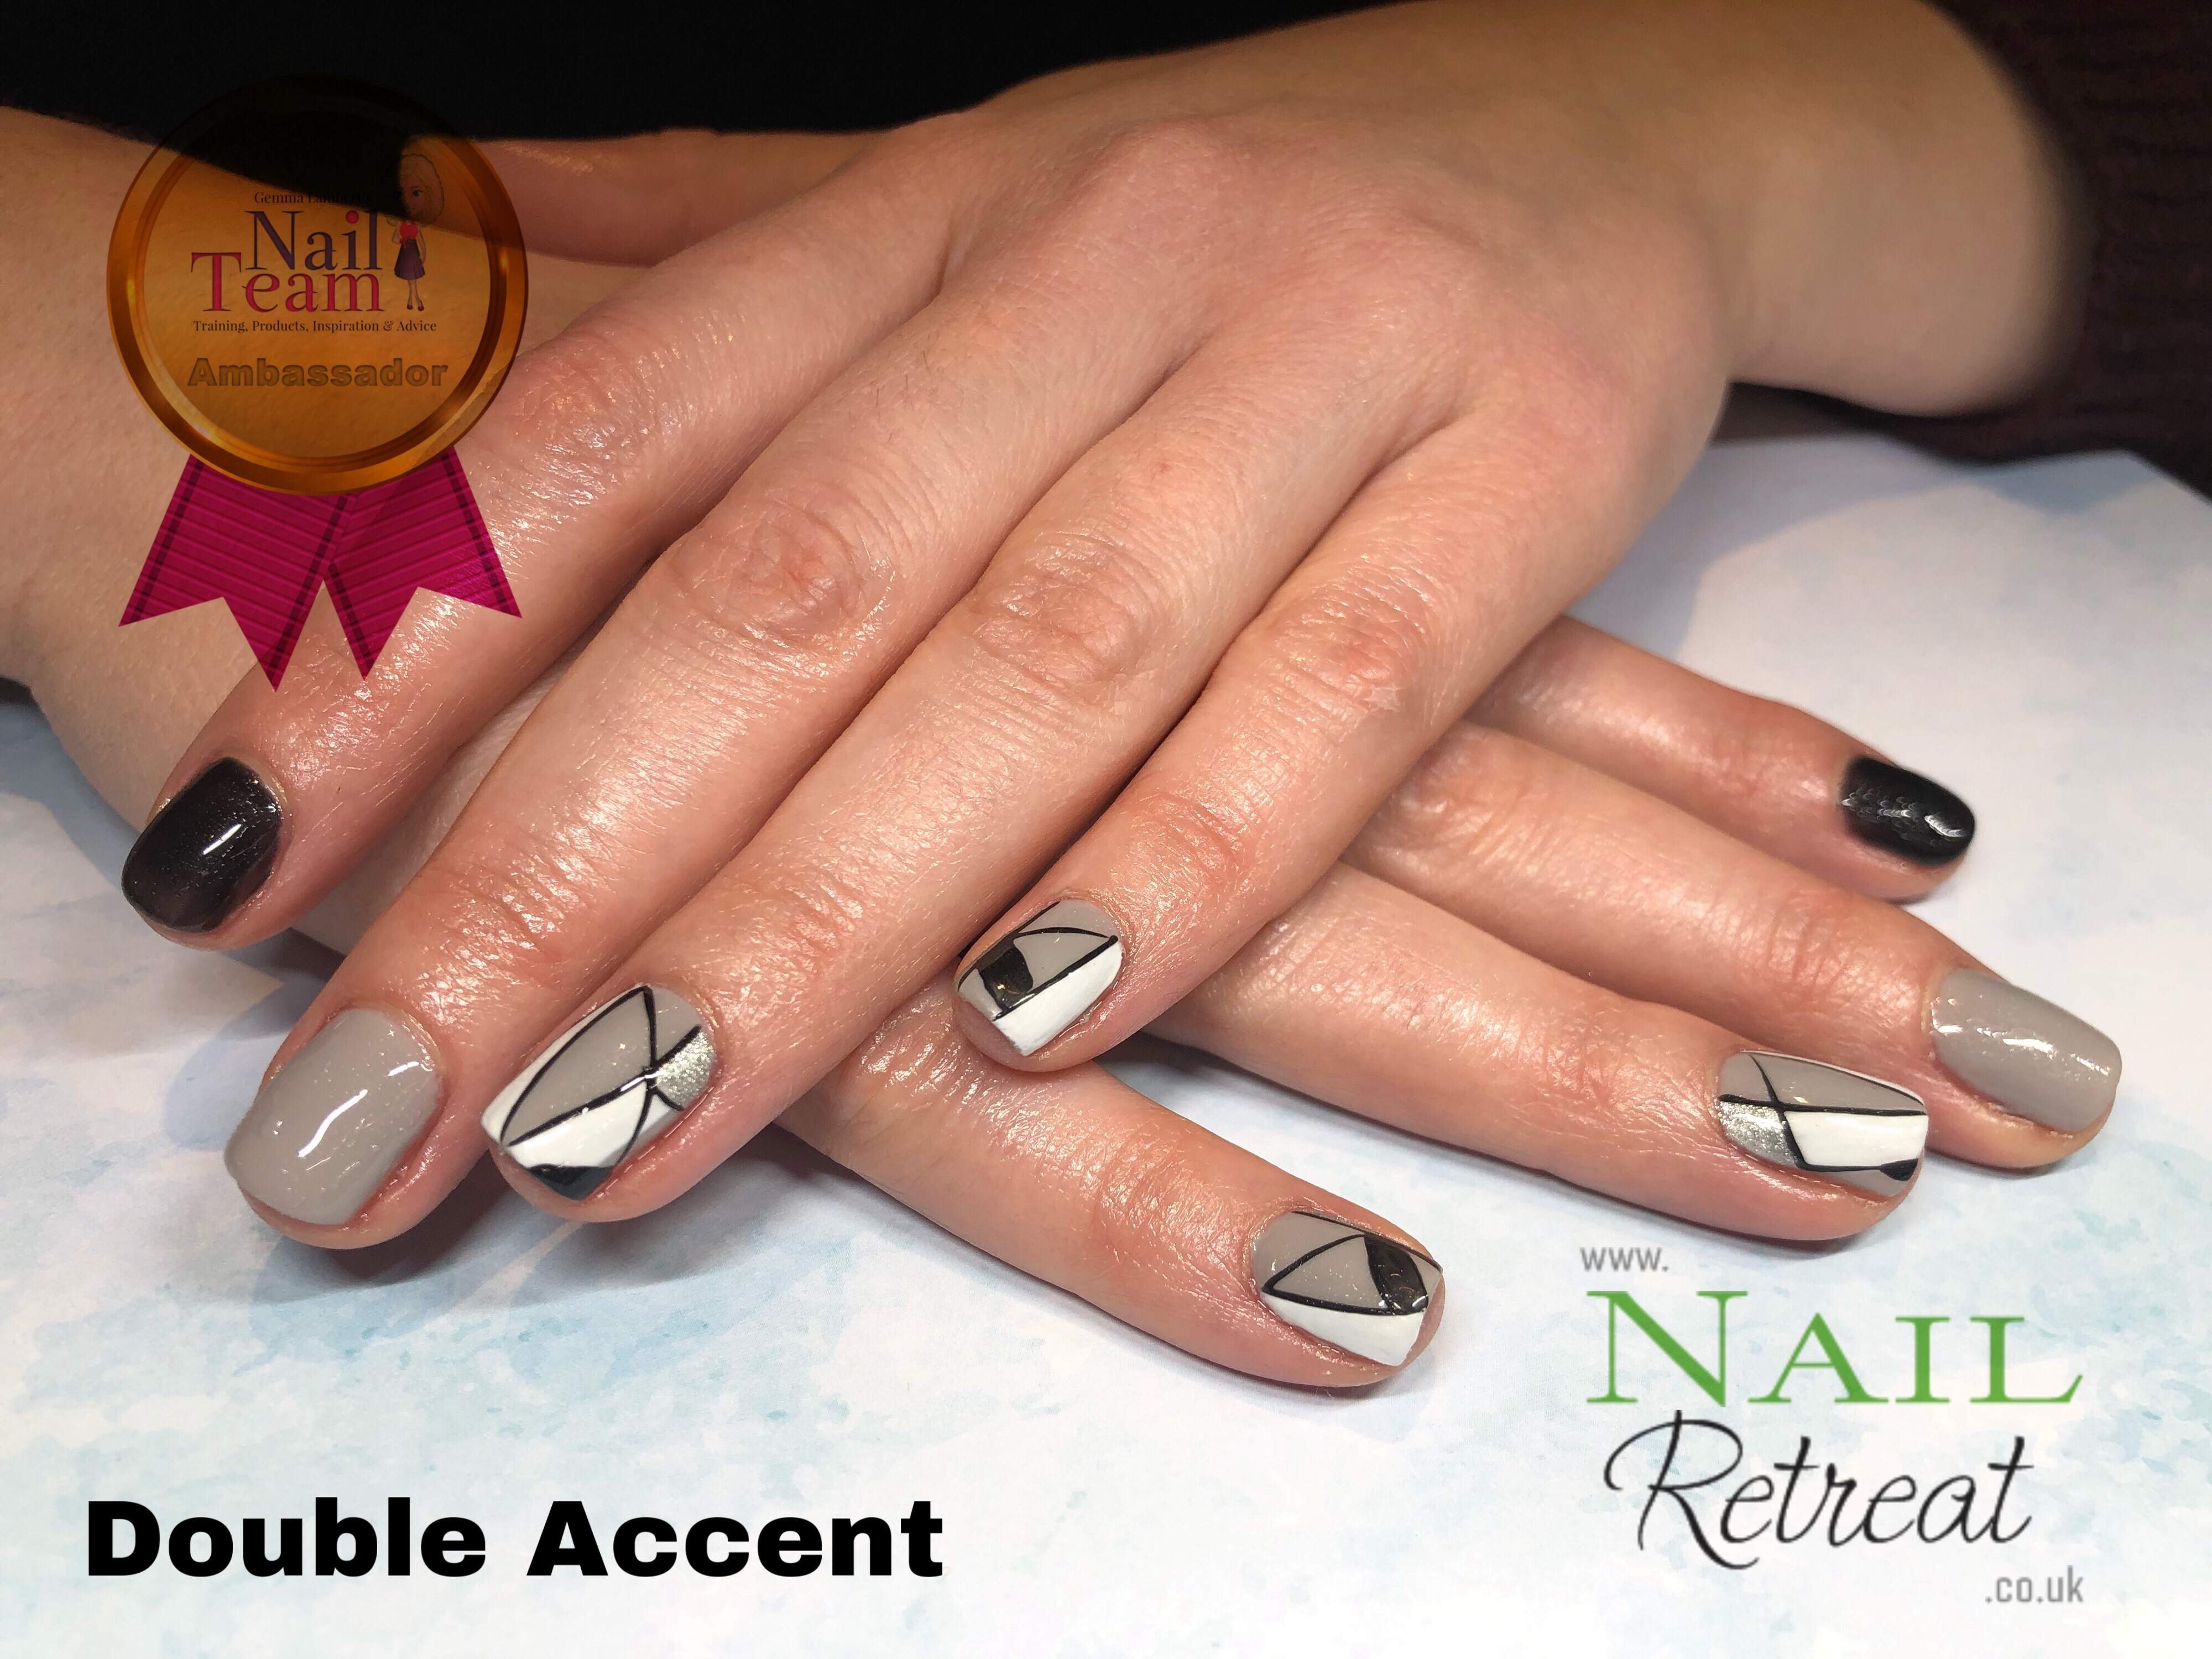 7. The Nail Retreat - wide 1